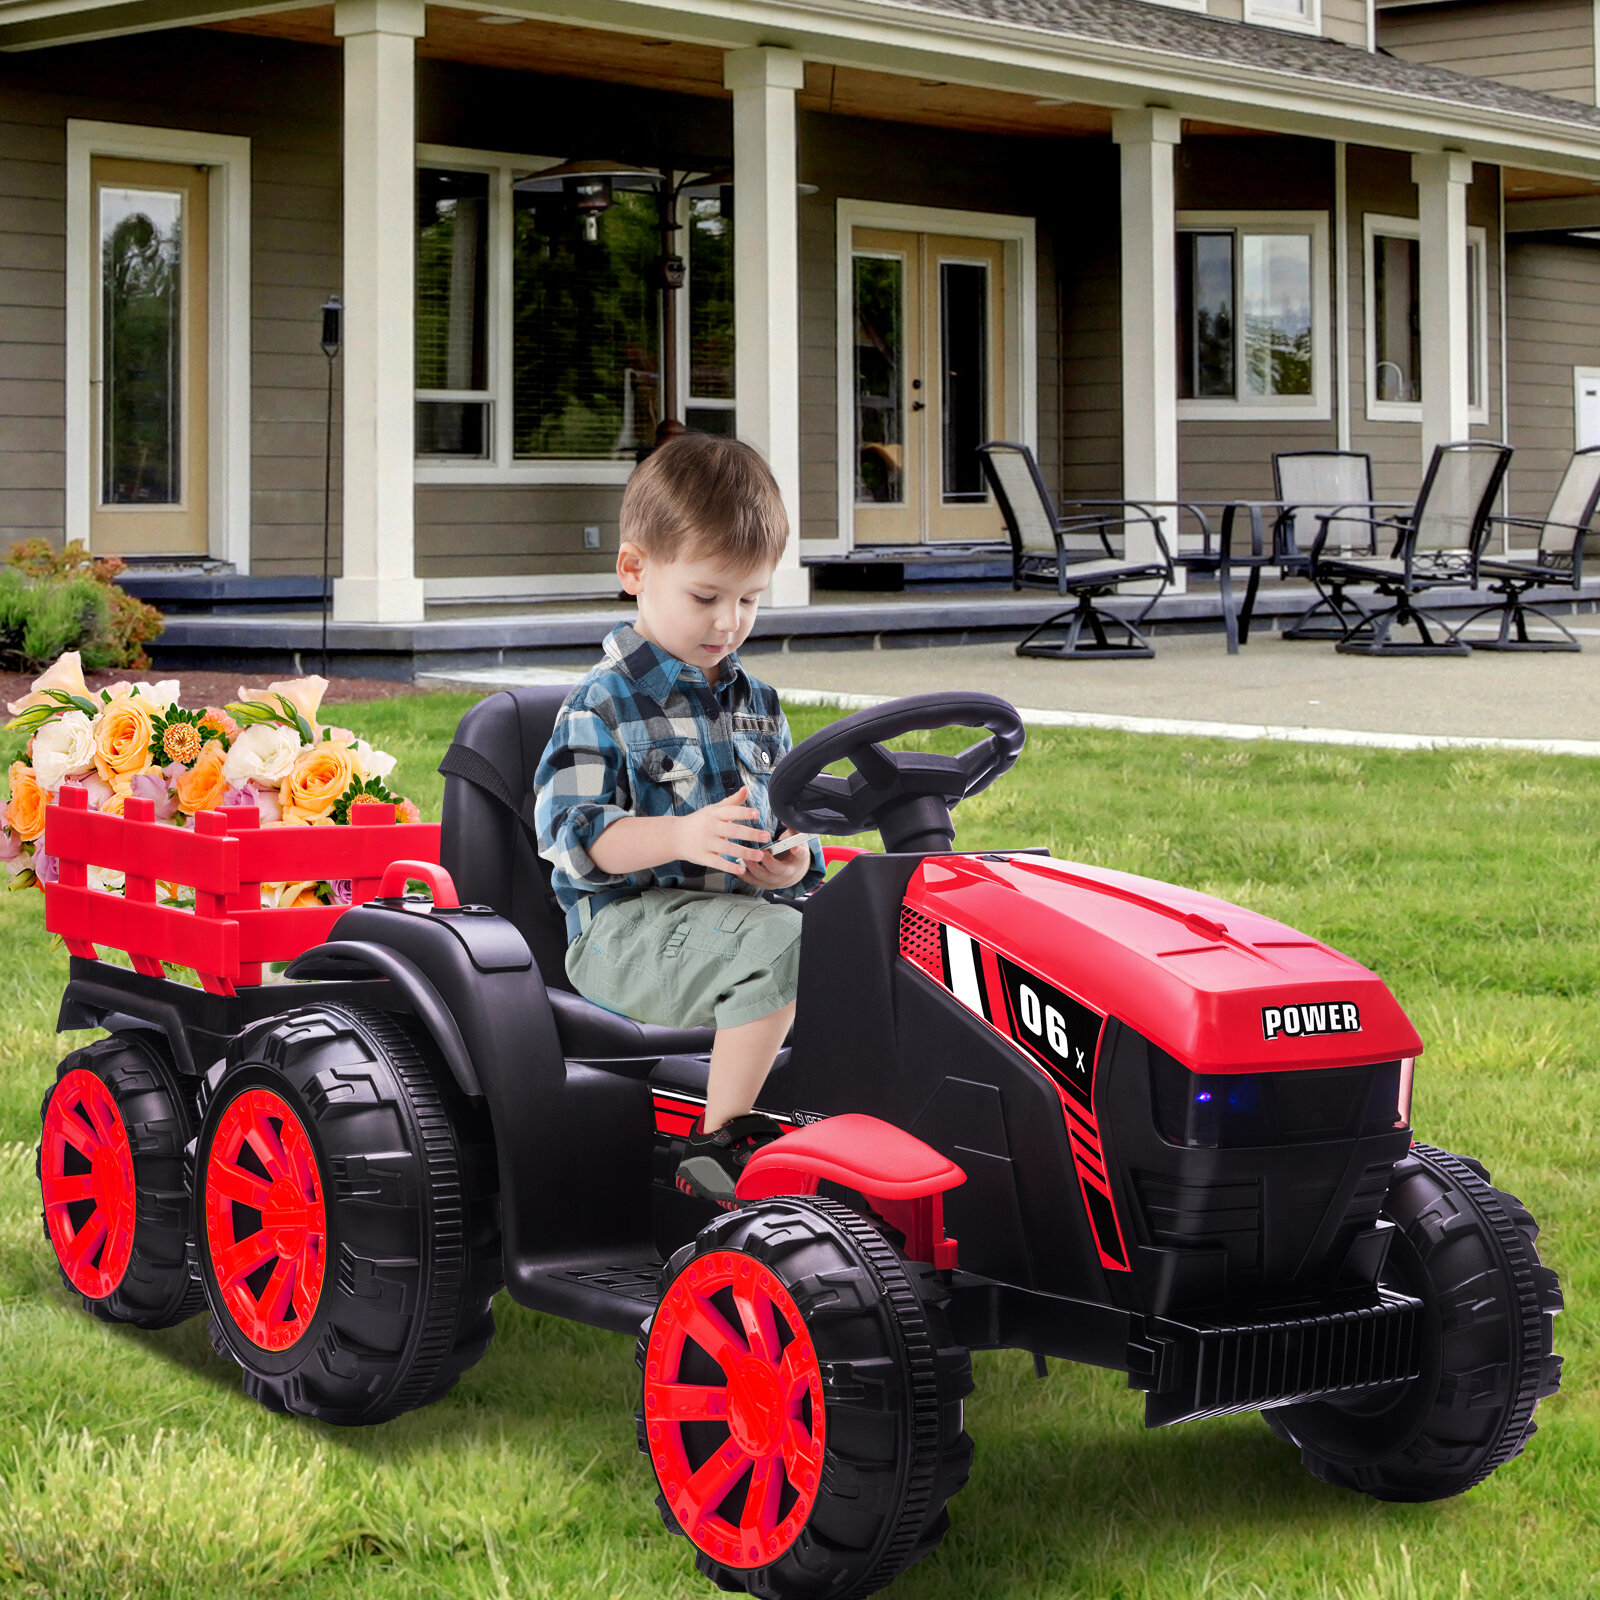 Kulamoon 12v Ride on Tractor Car for Kids with Remote Control & Reviews